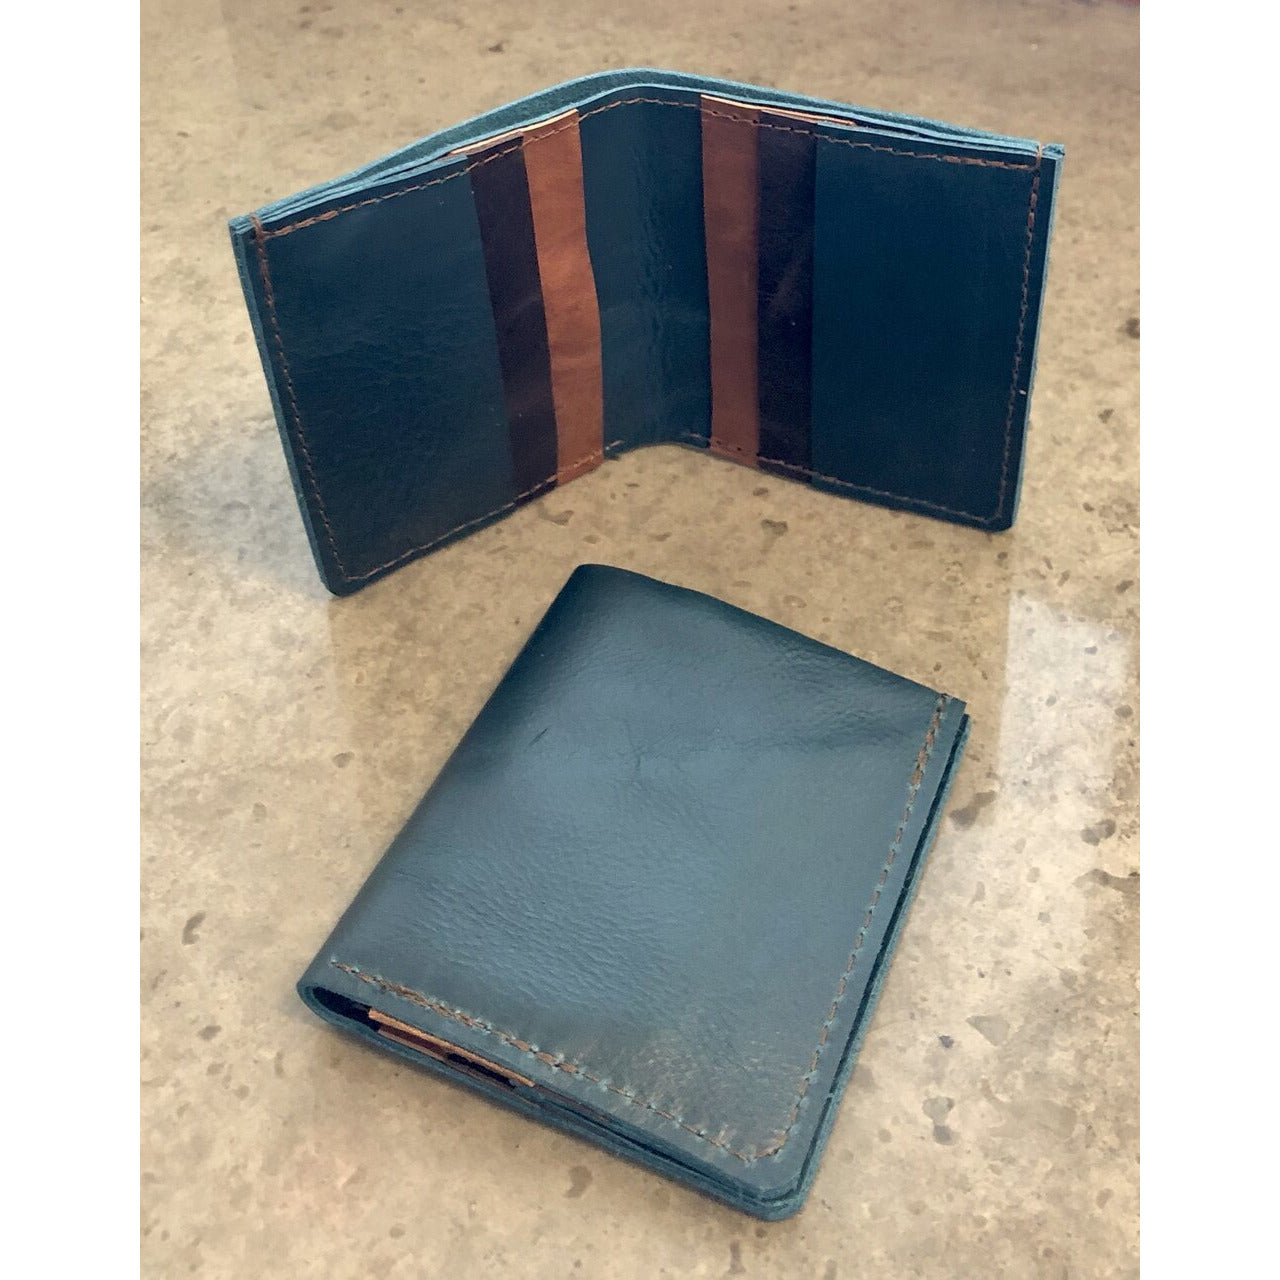 6 Pocket Leather Billfold in shiny teal green and brown